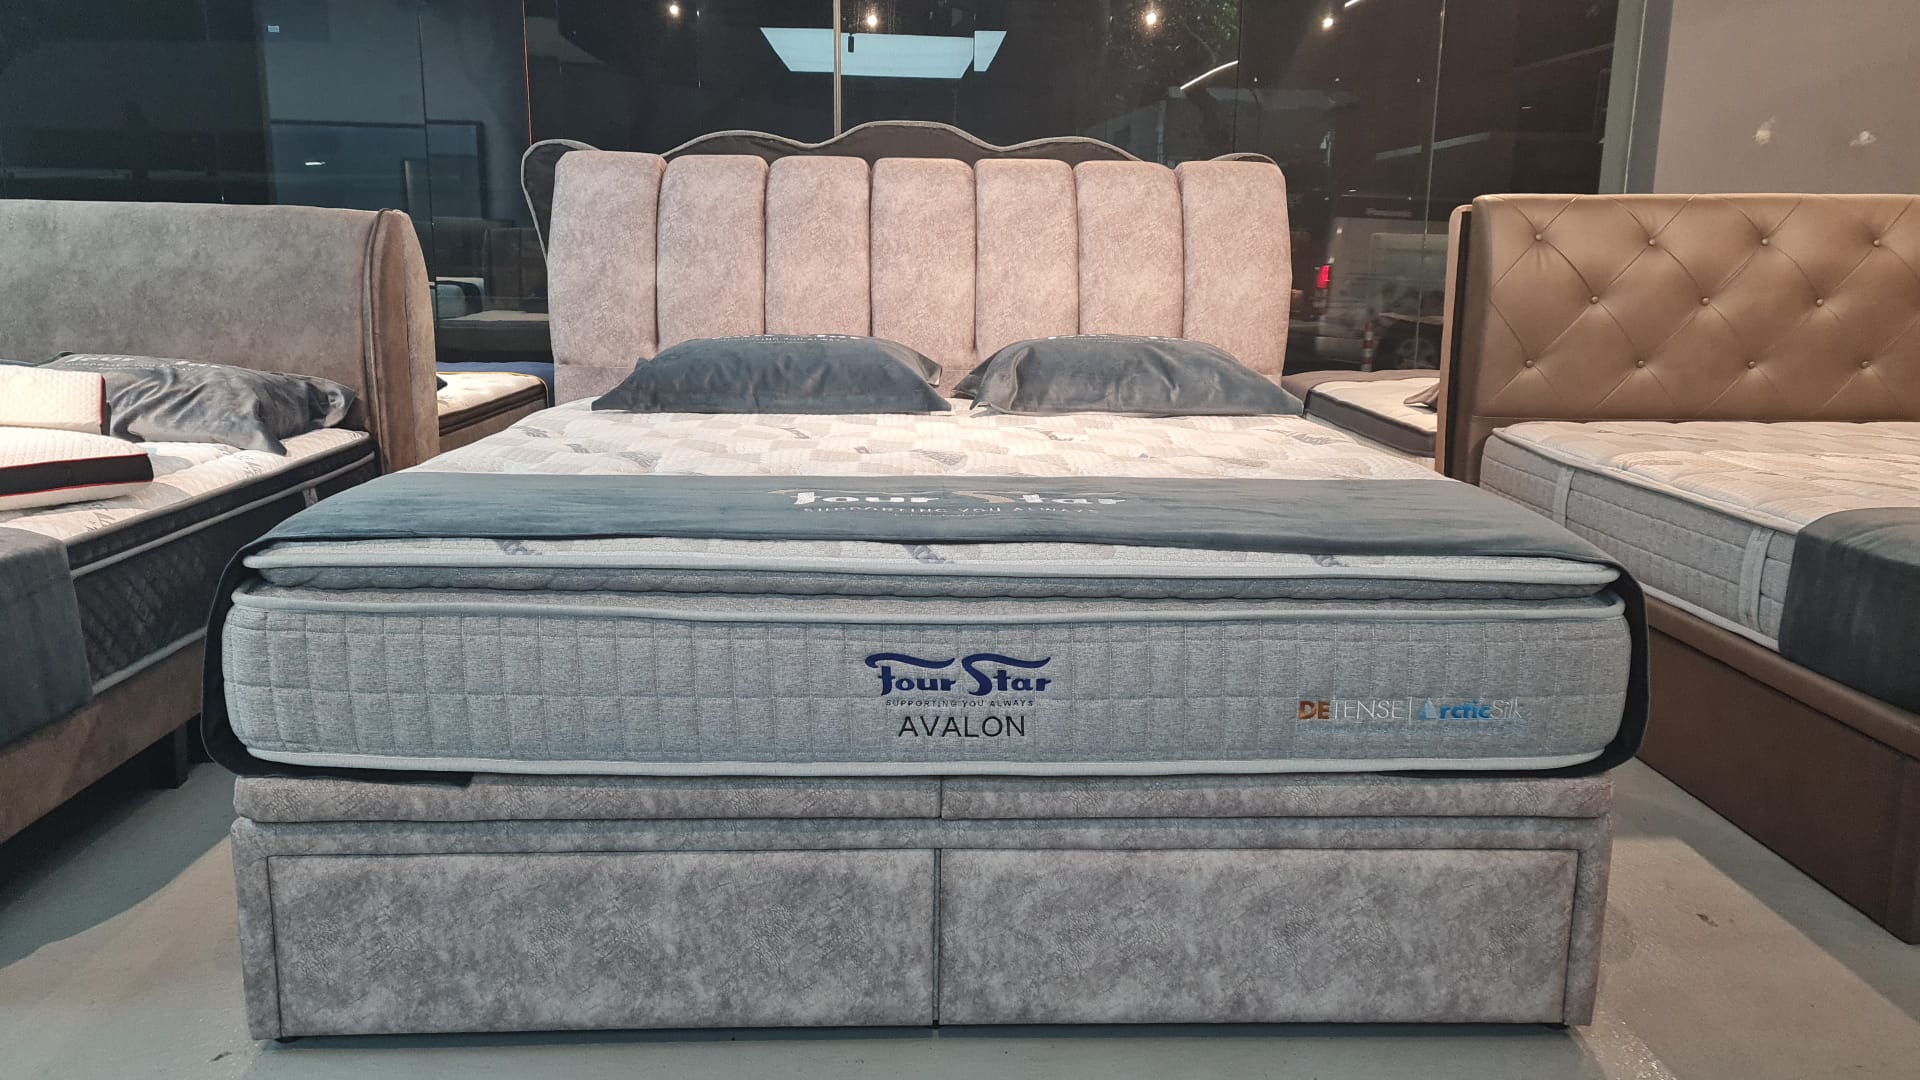 Lobang: Furniture Store Offering $88 Storage Beds When You Purchase A Mattress from 1 - 12 Mar 23 - 3